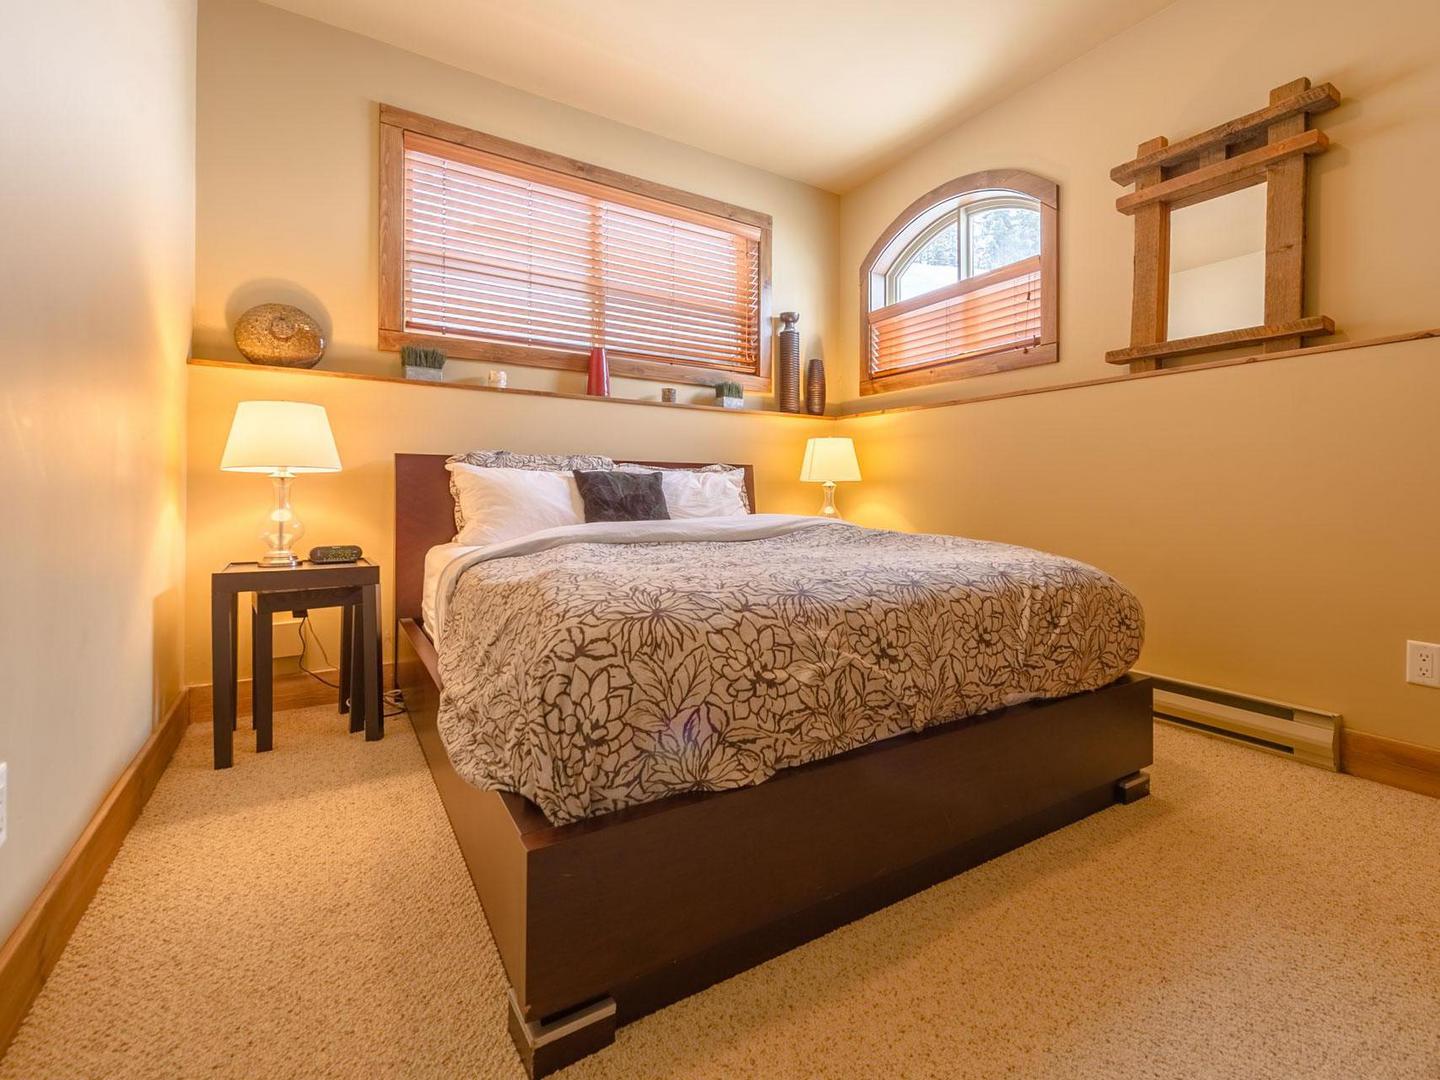 The queen bedroom suite with a cozy bedroom, carpeted floors and warm lighting in luxury vacation rental in South Point #15 at Big White Ski Resort.